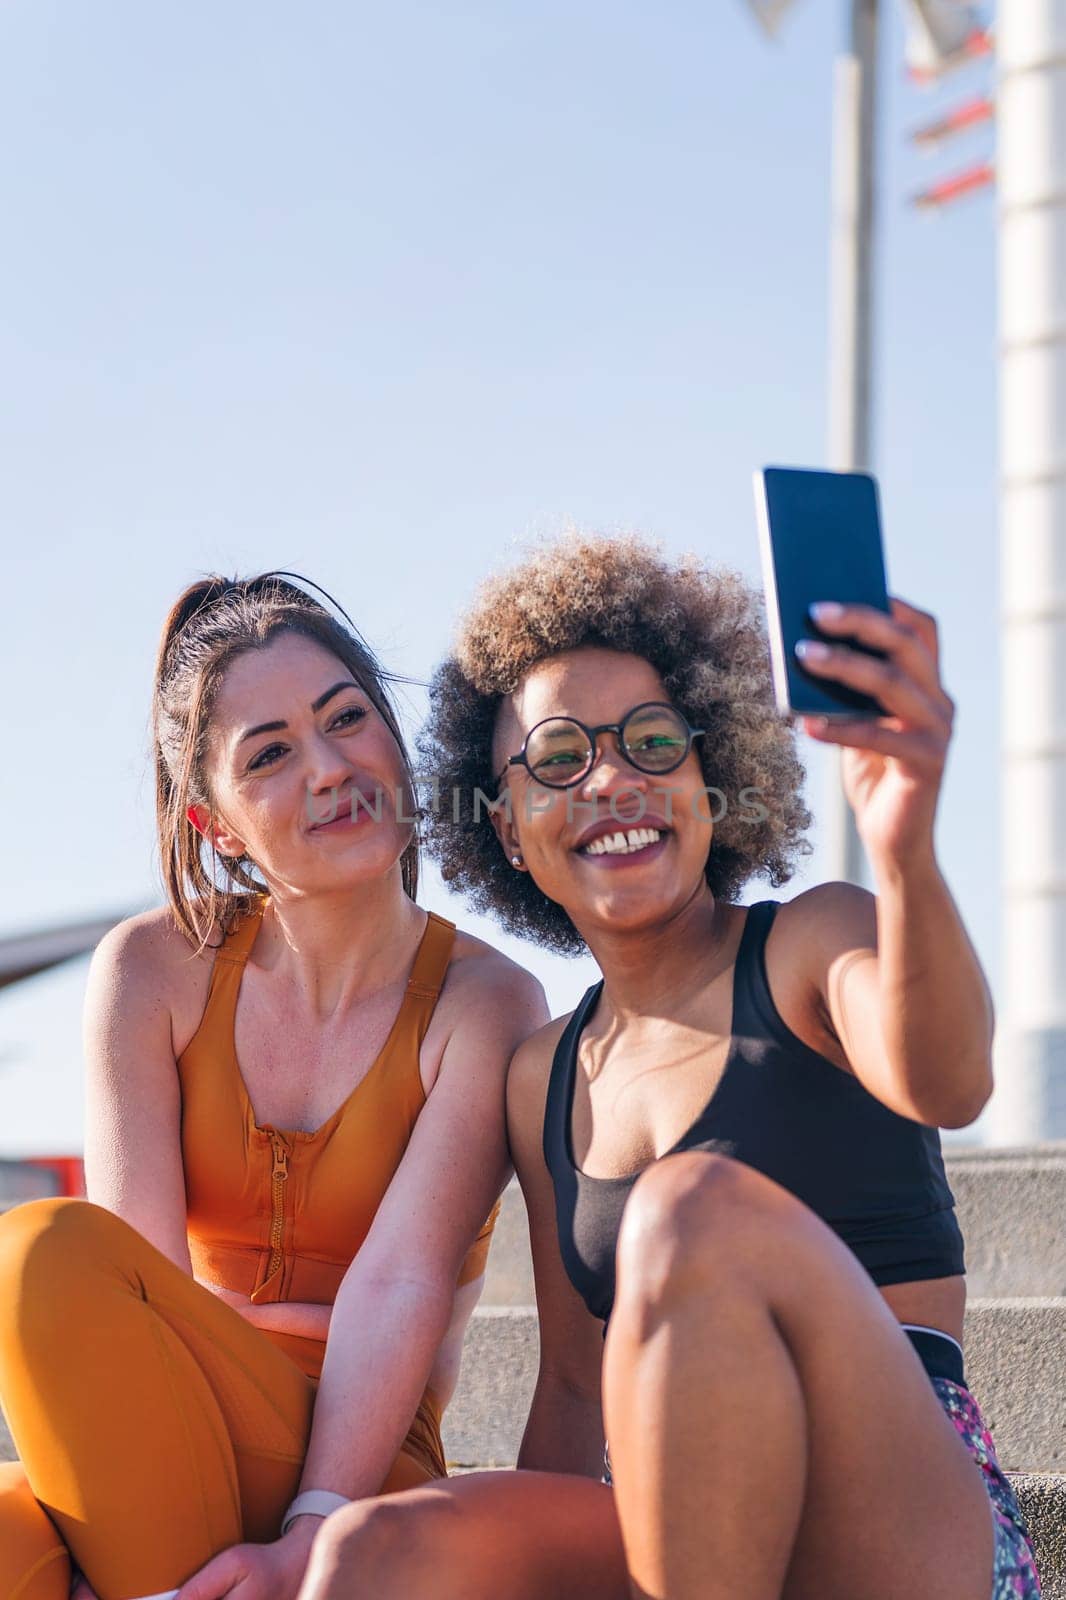 vertical photo of two female runner friends taking selfie photo with mobile phone sitting on urban stairs, concept of friendship and sporty lifestyle, copy space for text